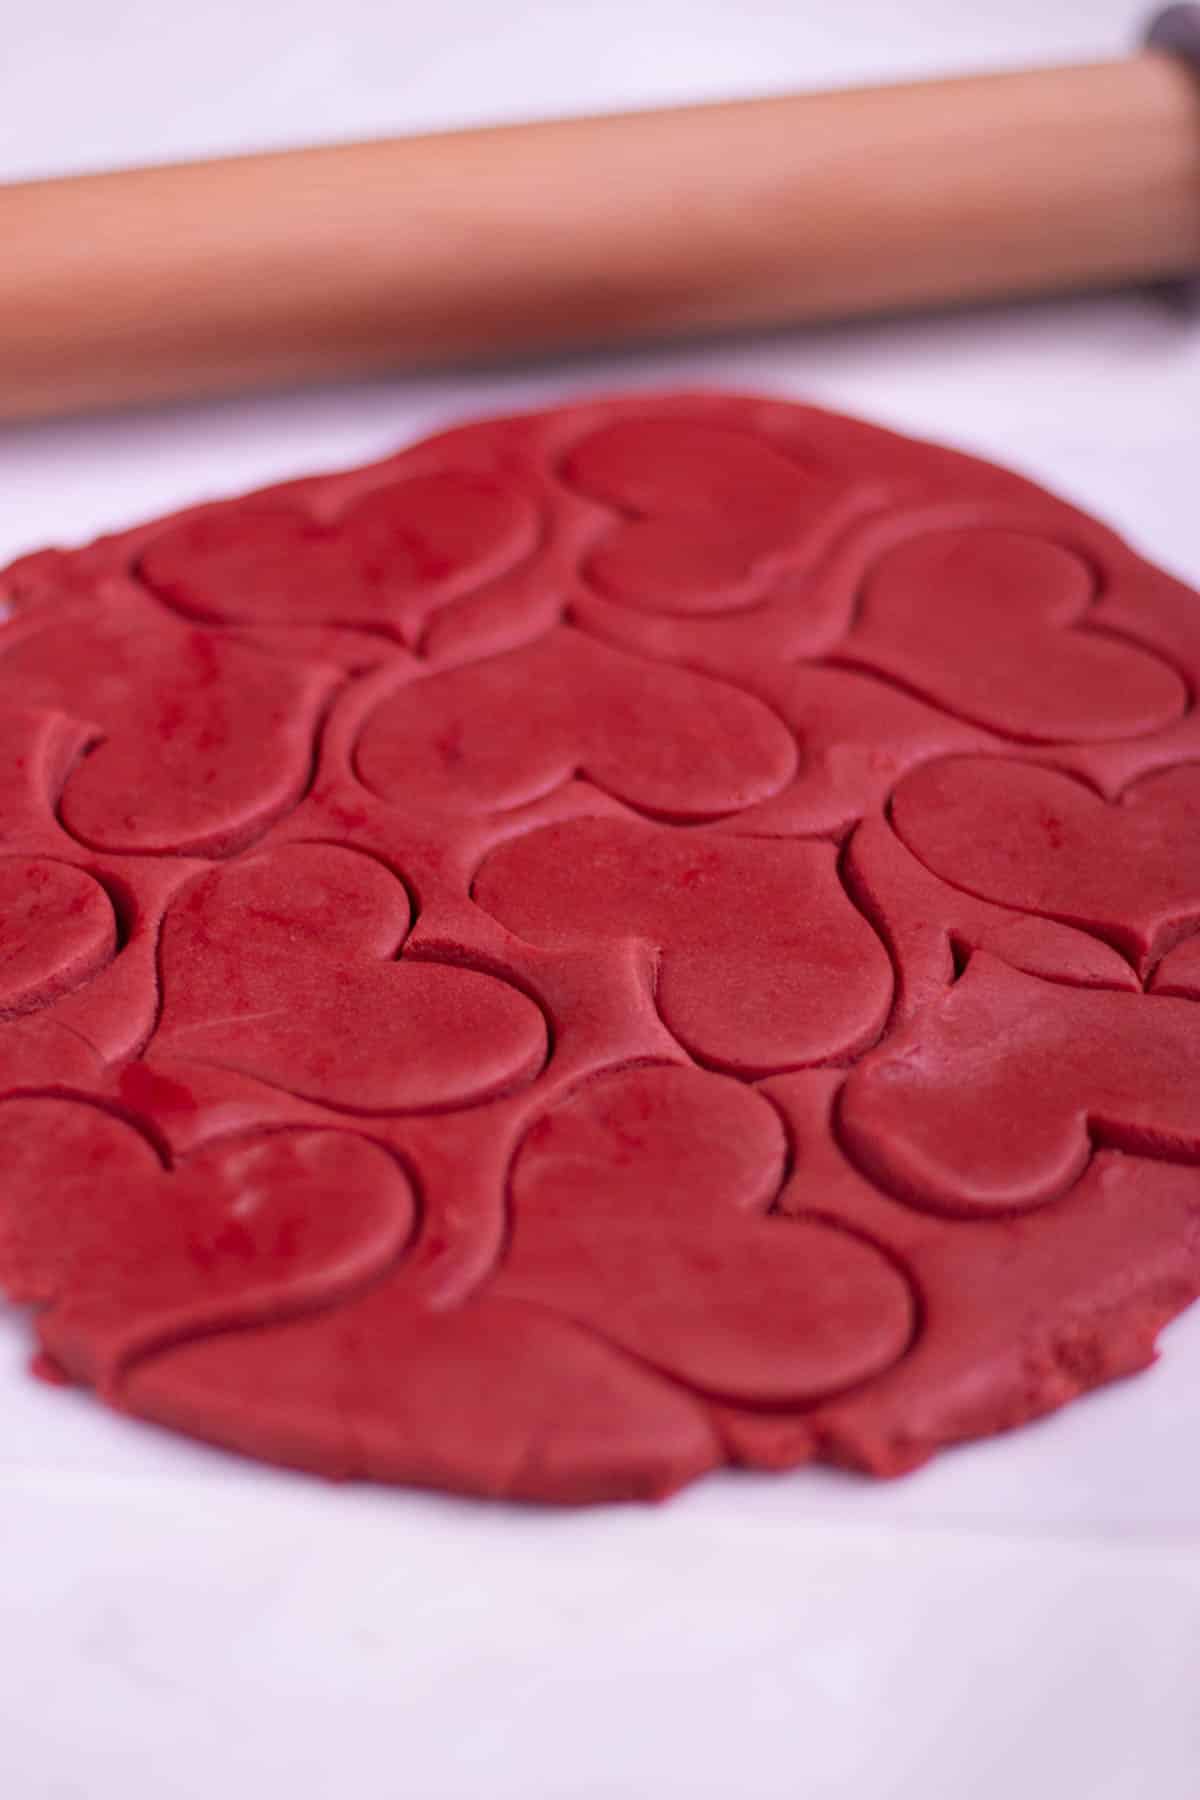 Heart cut-outs in the dough, next to a rolling pin. 